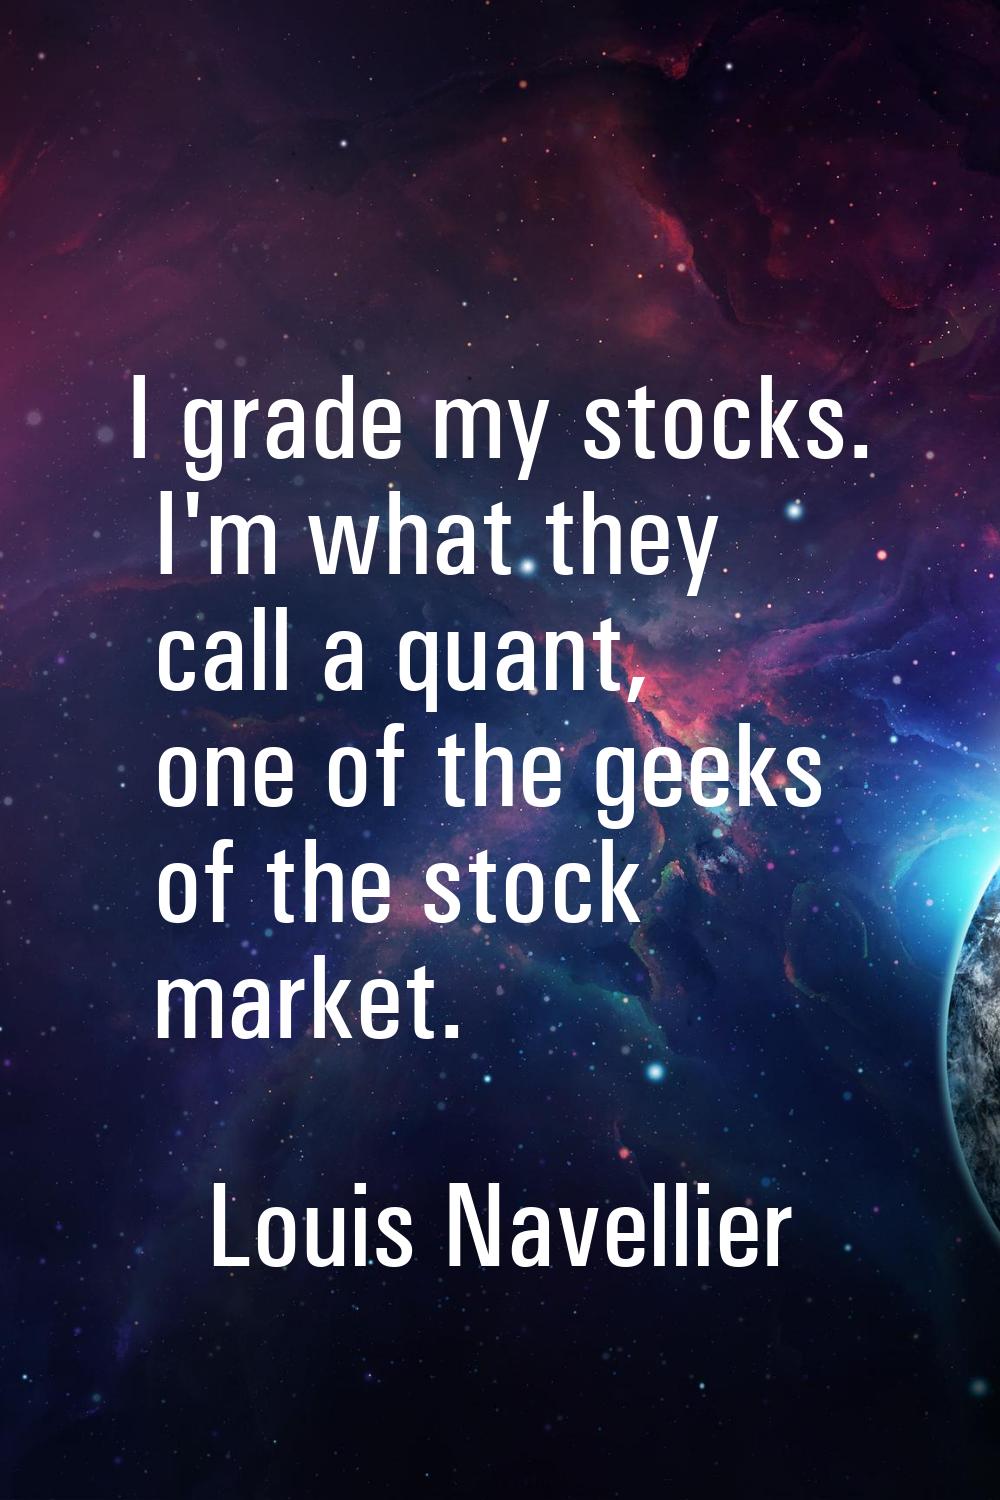 I grade my stocks. I'm what they call a quant, one of the geeks of the stock market.